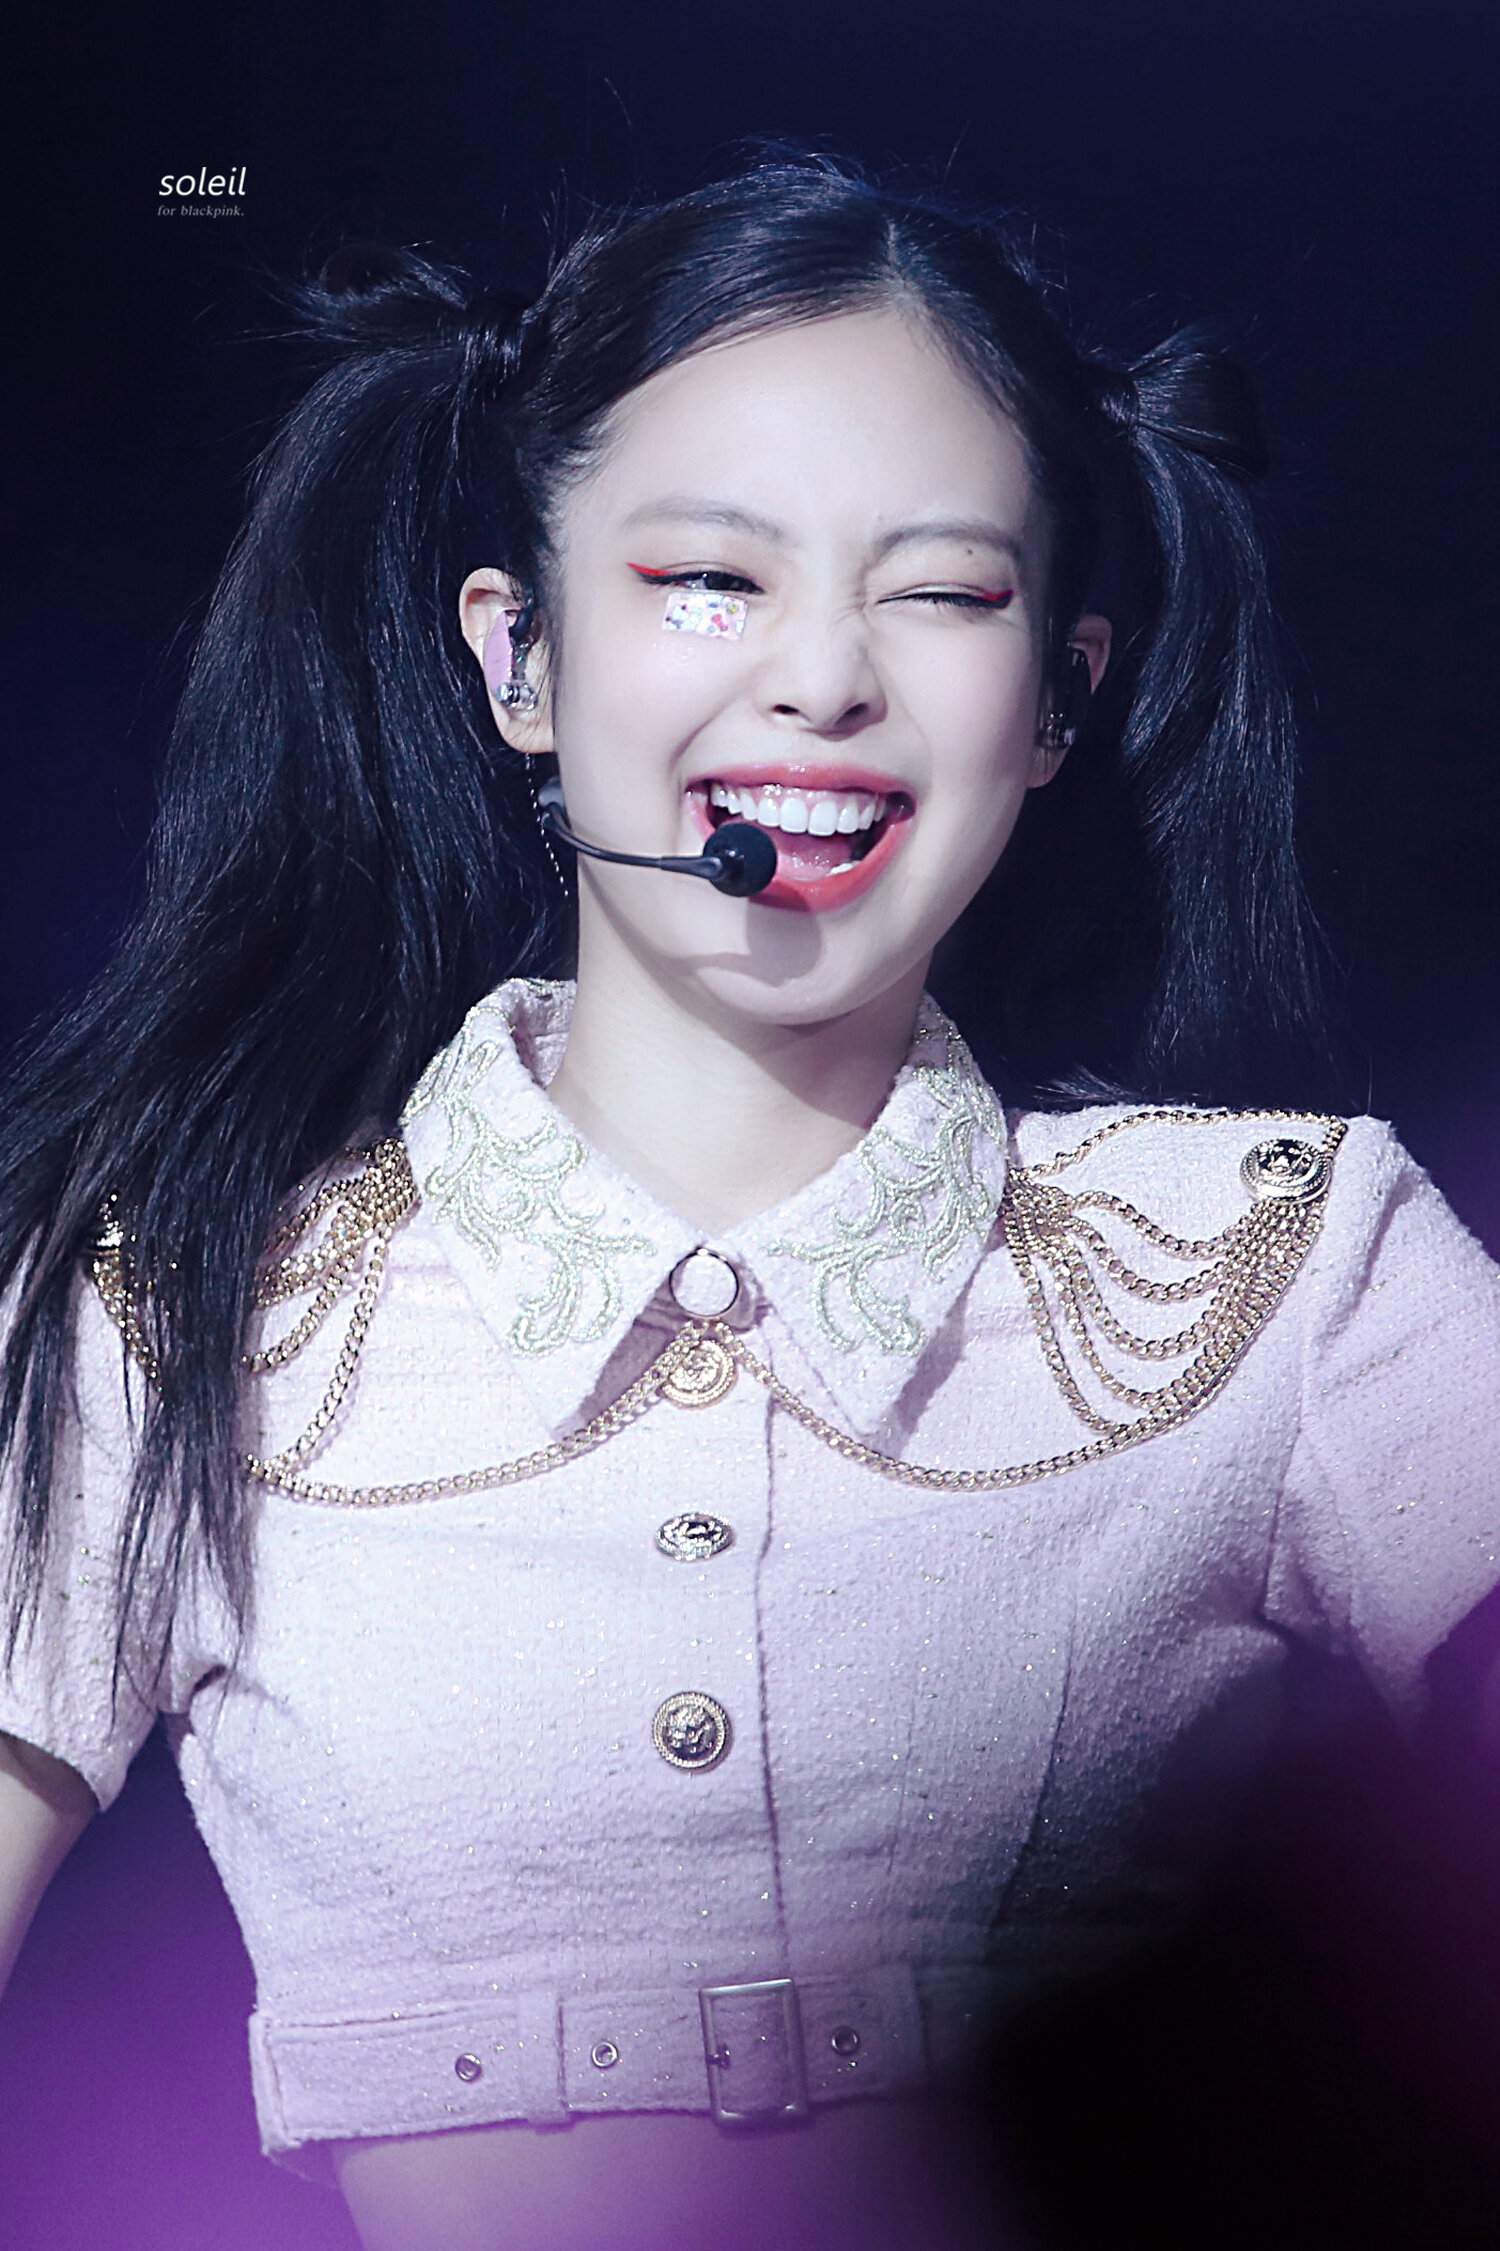 𝙅𝙀𝙉𝙉𝙄𝙀 𝙉𝙀𝙒𝙎 on X: 📸 230318 #JENNIE at BORN PINK in Kaohsiung -  Day 1 soundcheck  / X